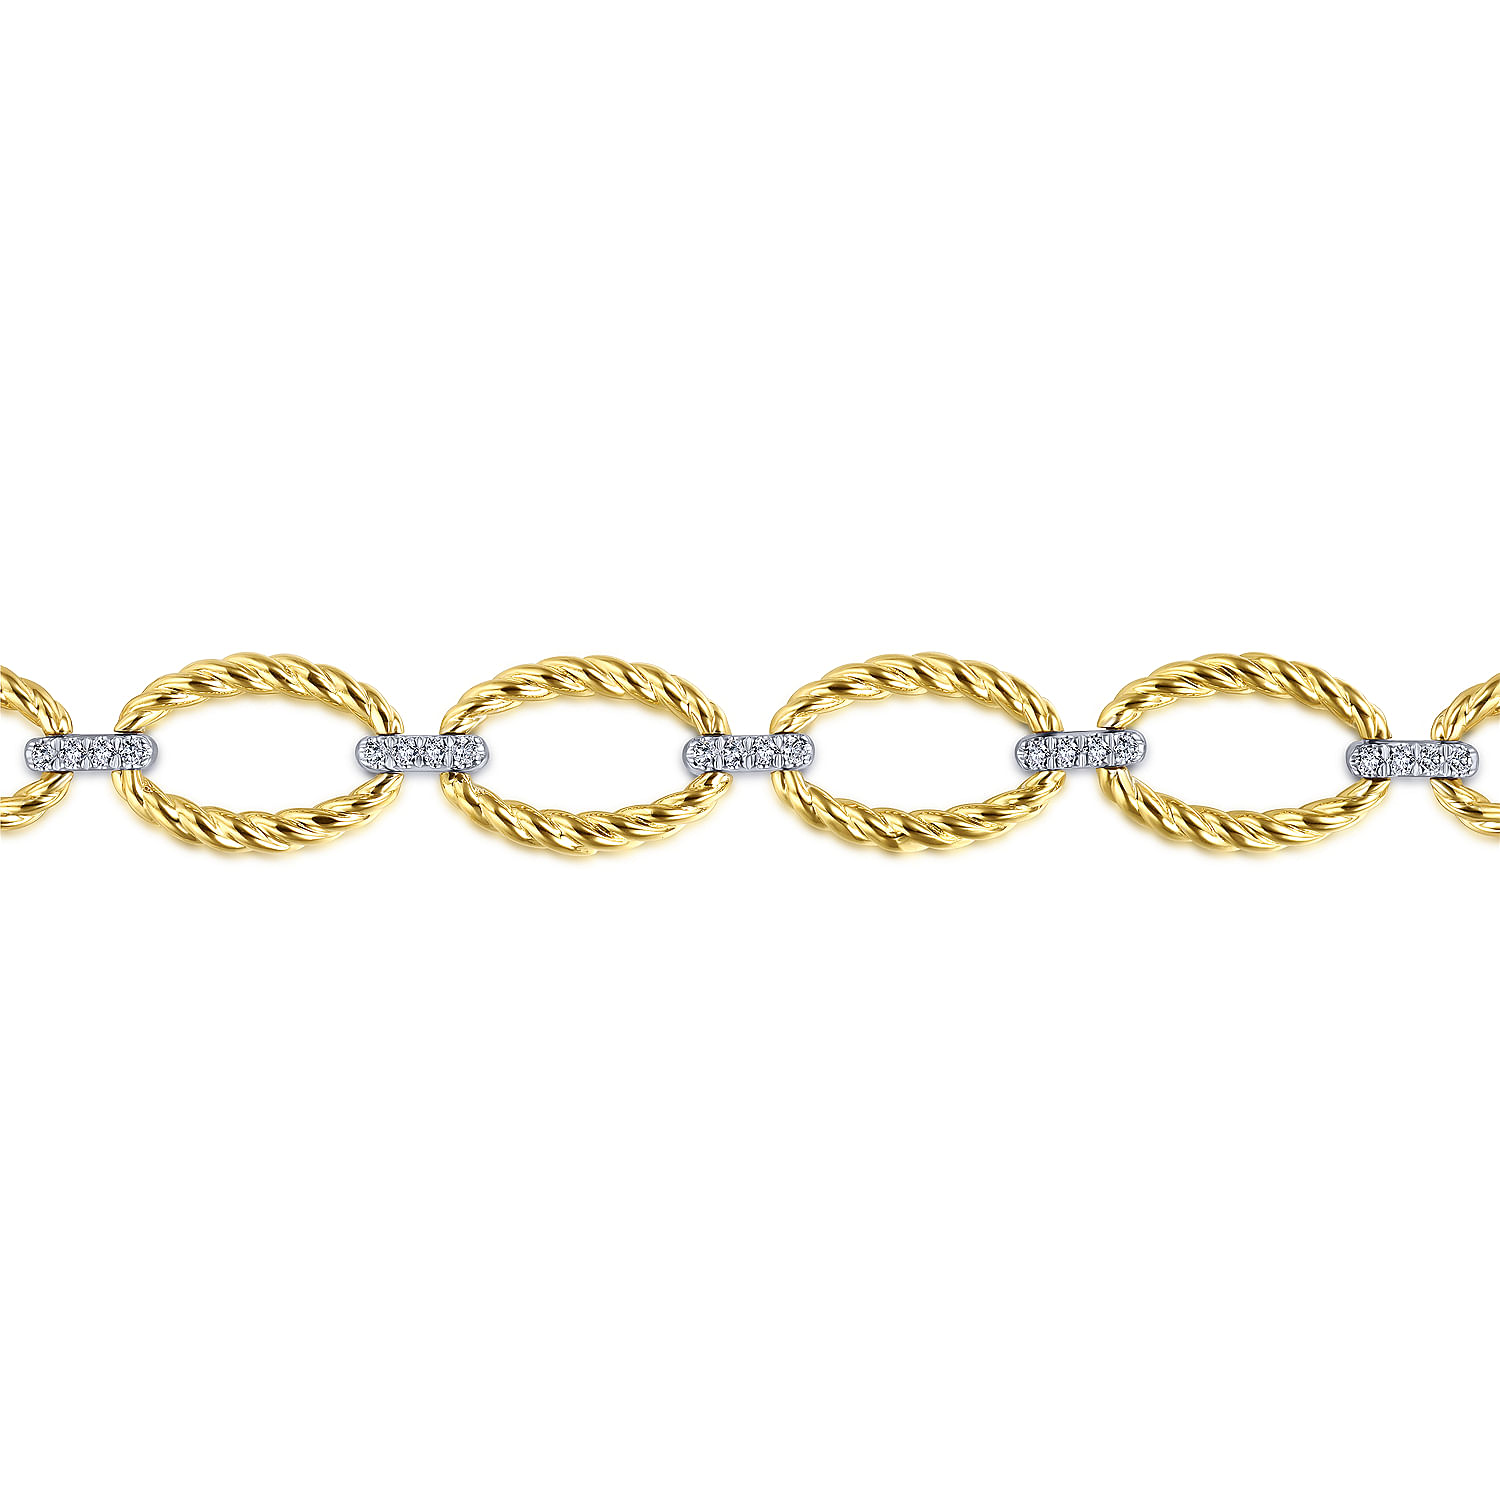 14K Yellow-White Gold Twisted Rope Oval Link Bracelet with Diamond Connectors